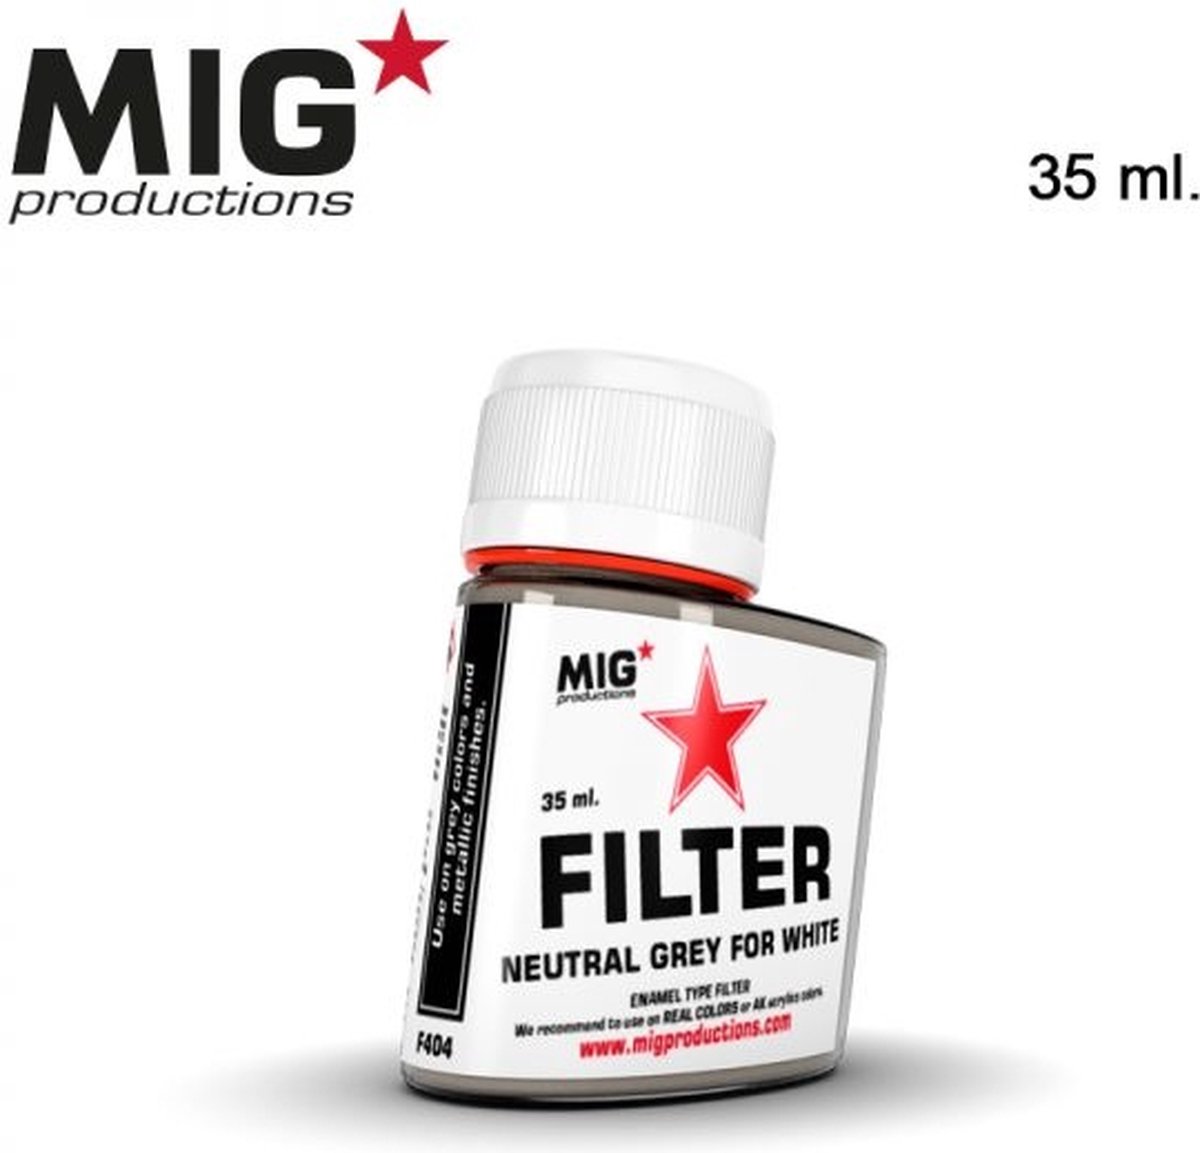 MIG Productions - F404 - Neutral Grey Filter for White - 35ml -